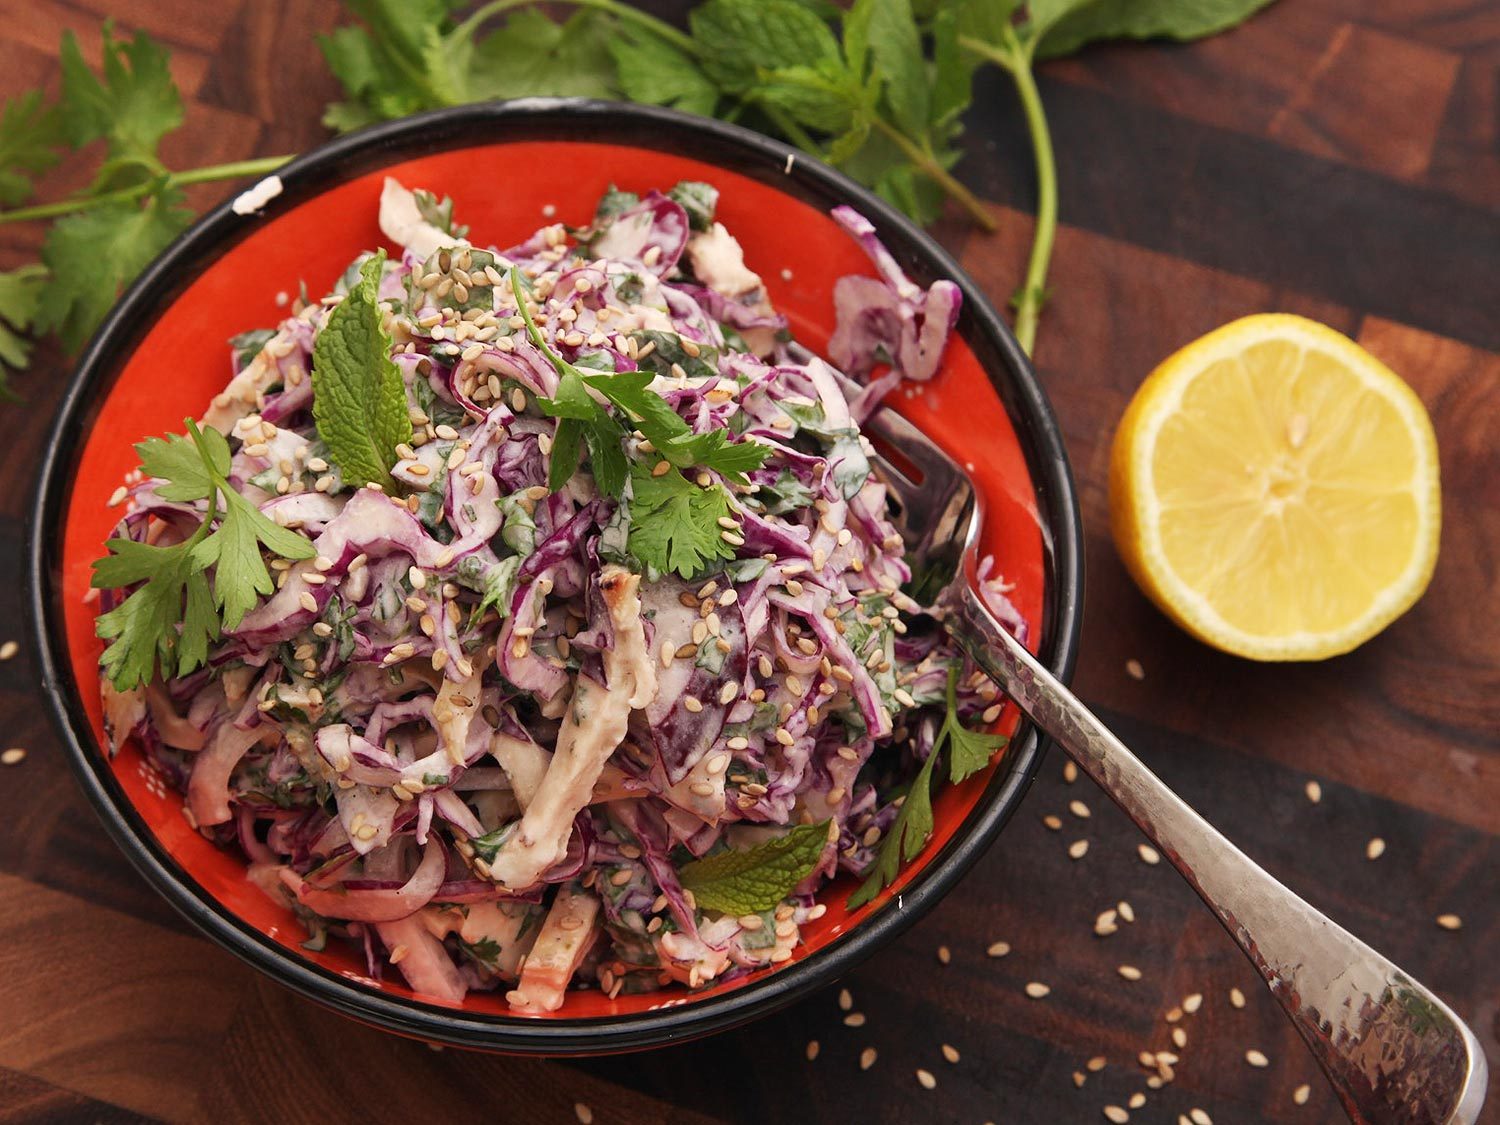 http://www.seriouseats.com/recipes/2015/08/grilled-chicken-and-cabbage-salad-recipe.html